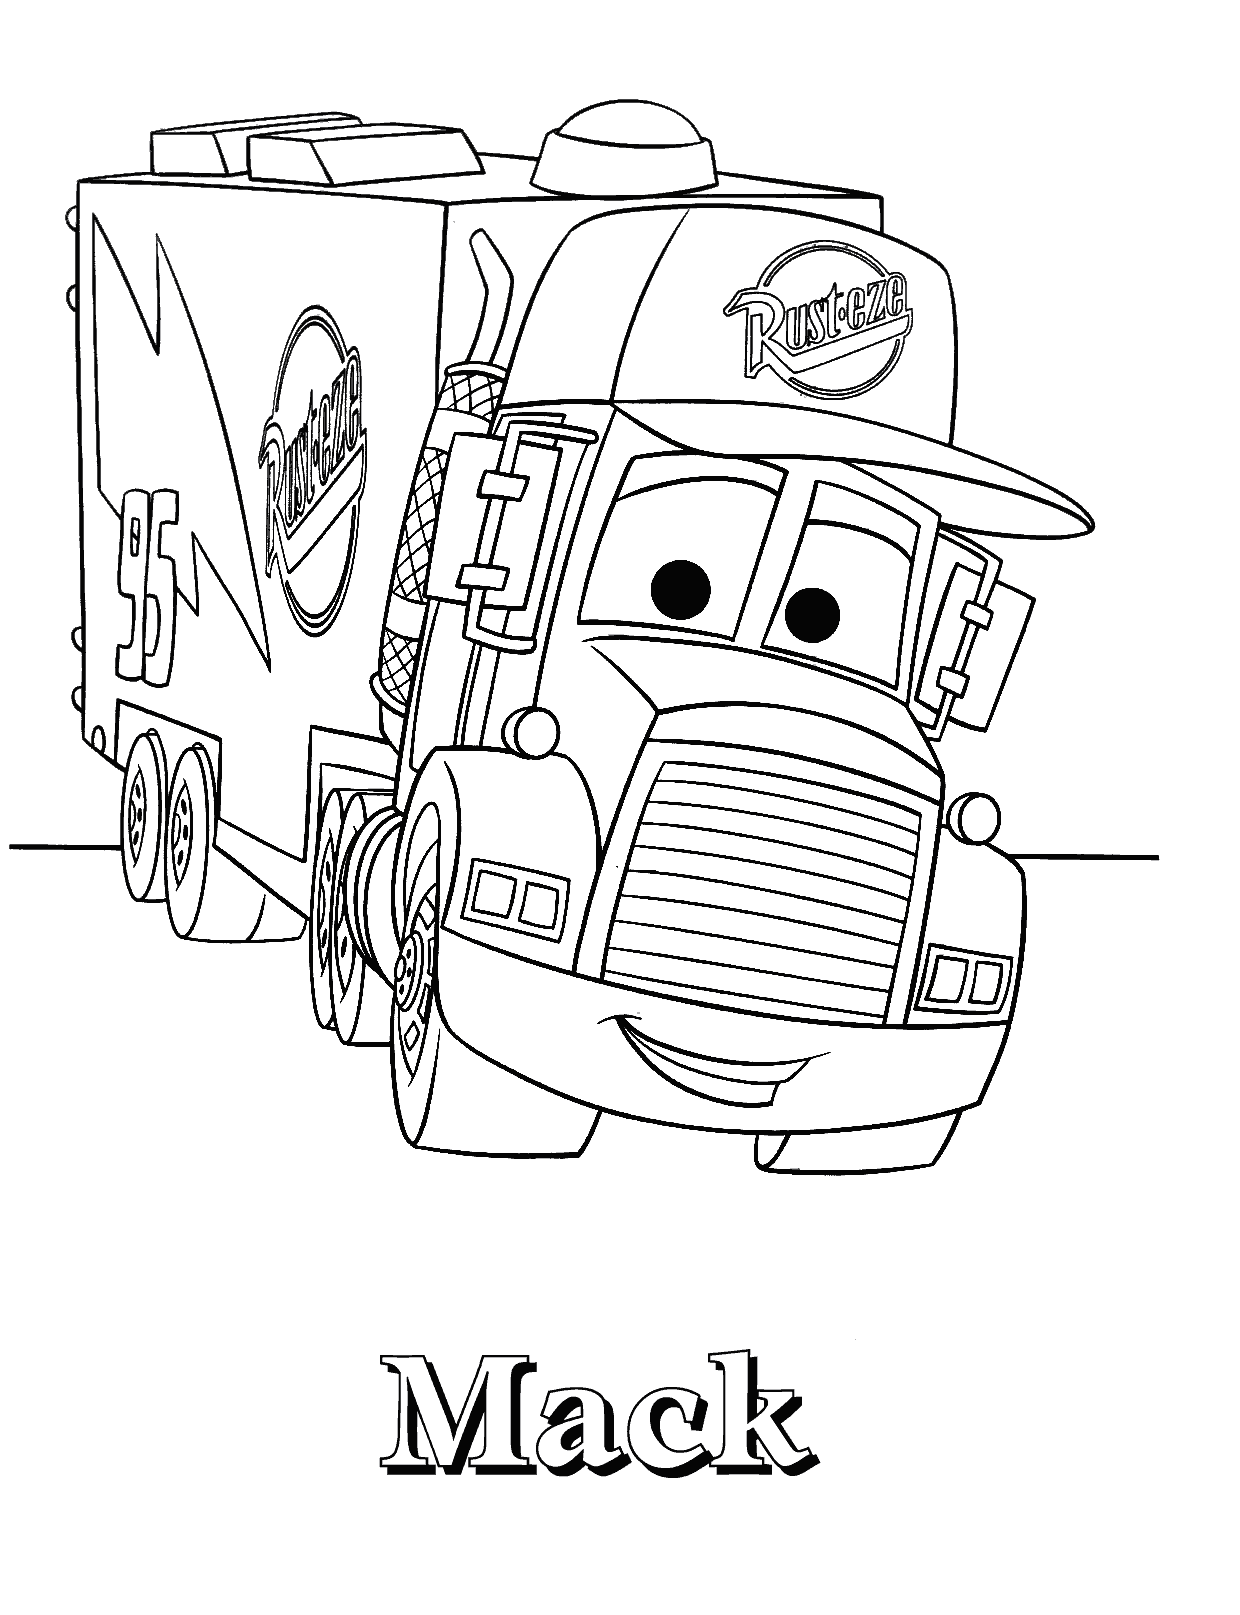 disney cars coloring pages macklightning mcqueen mack truck